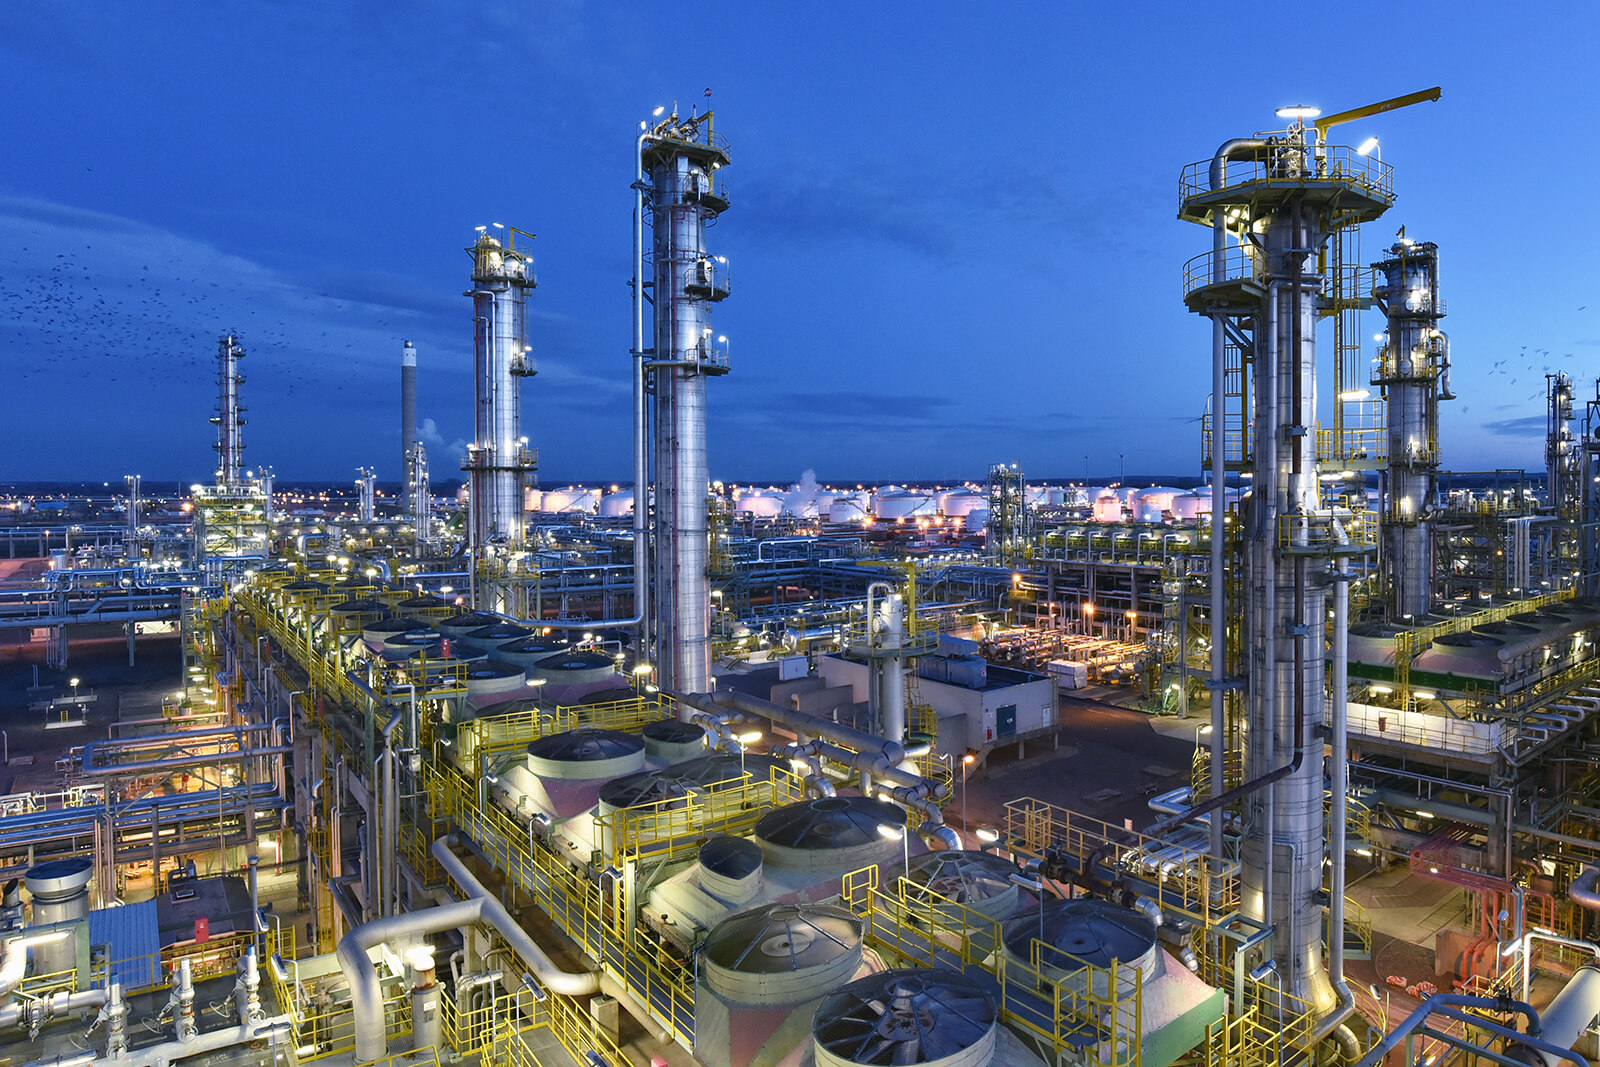 Industrial plant petrochemical processing refinery at night - production and processing of crude oil.